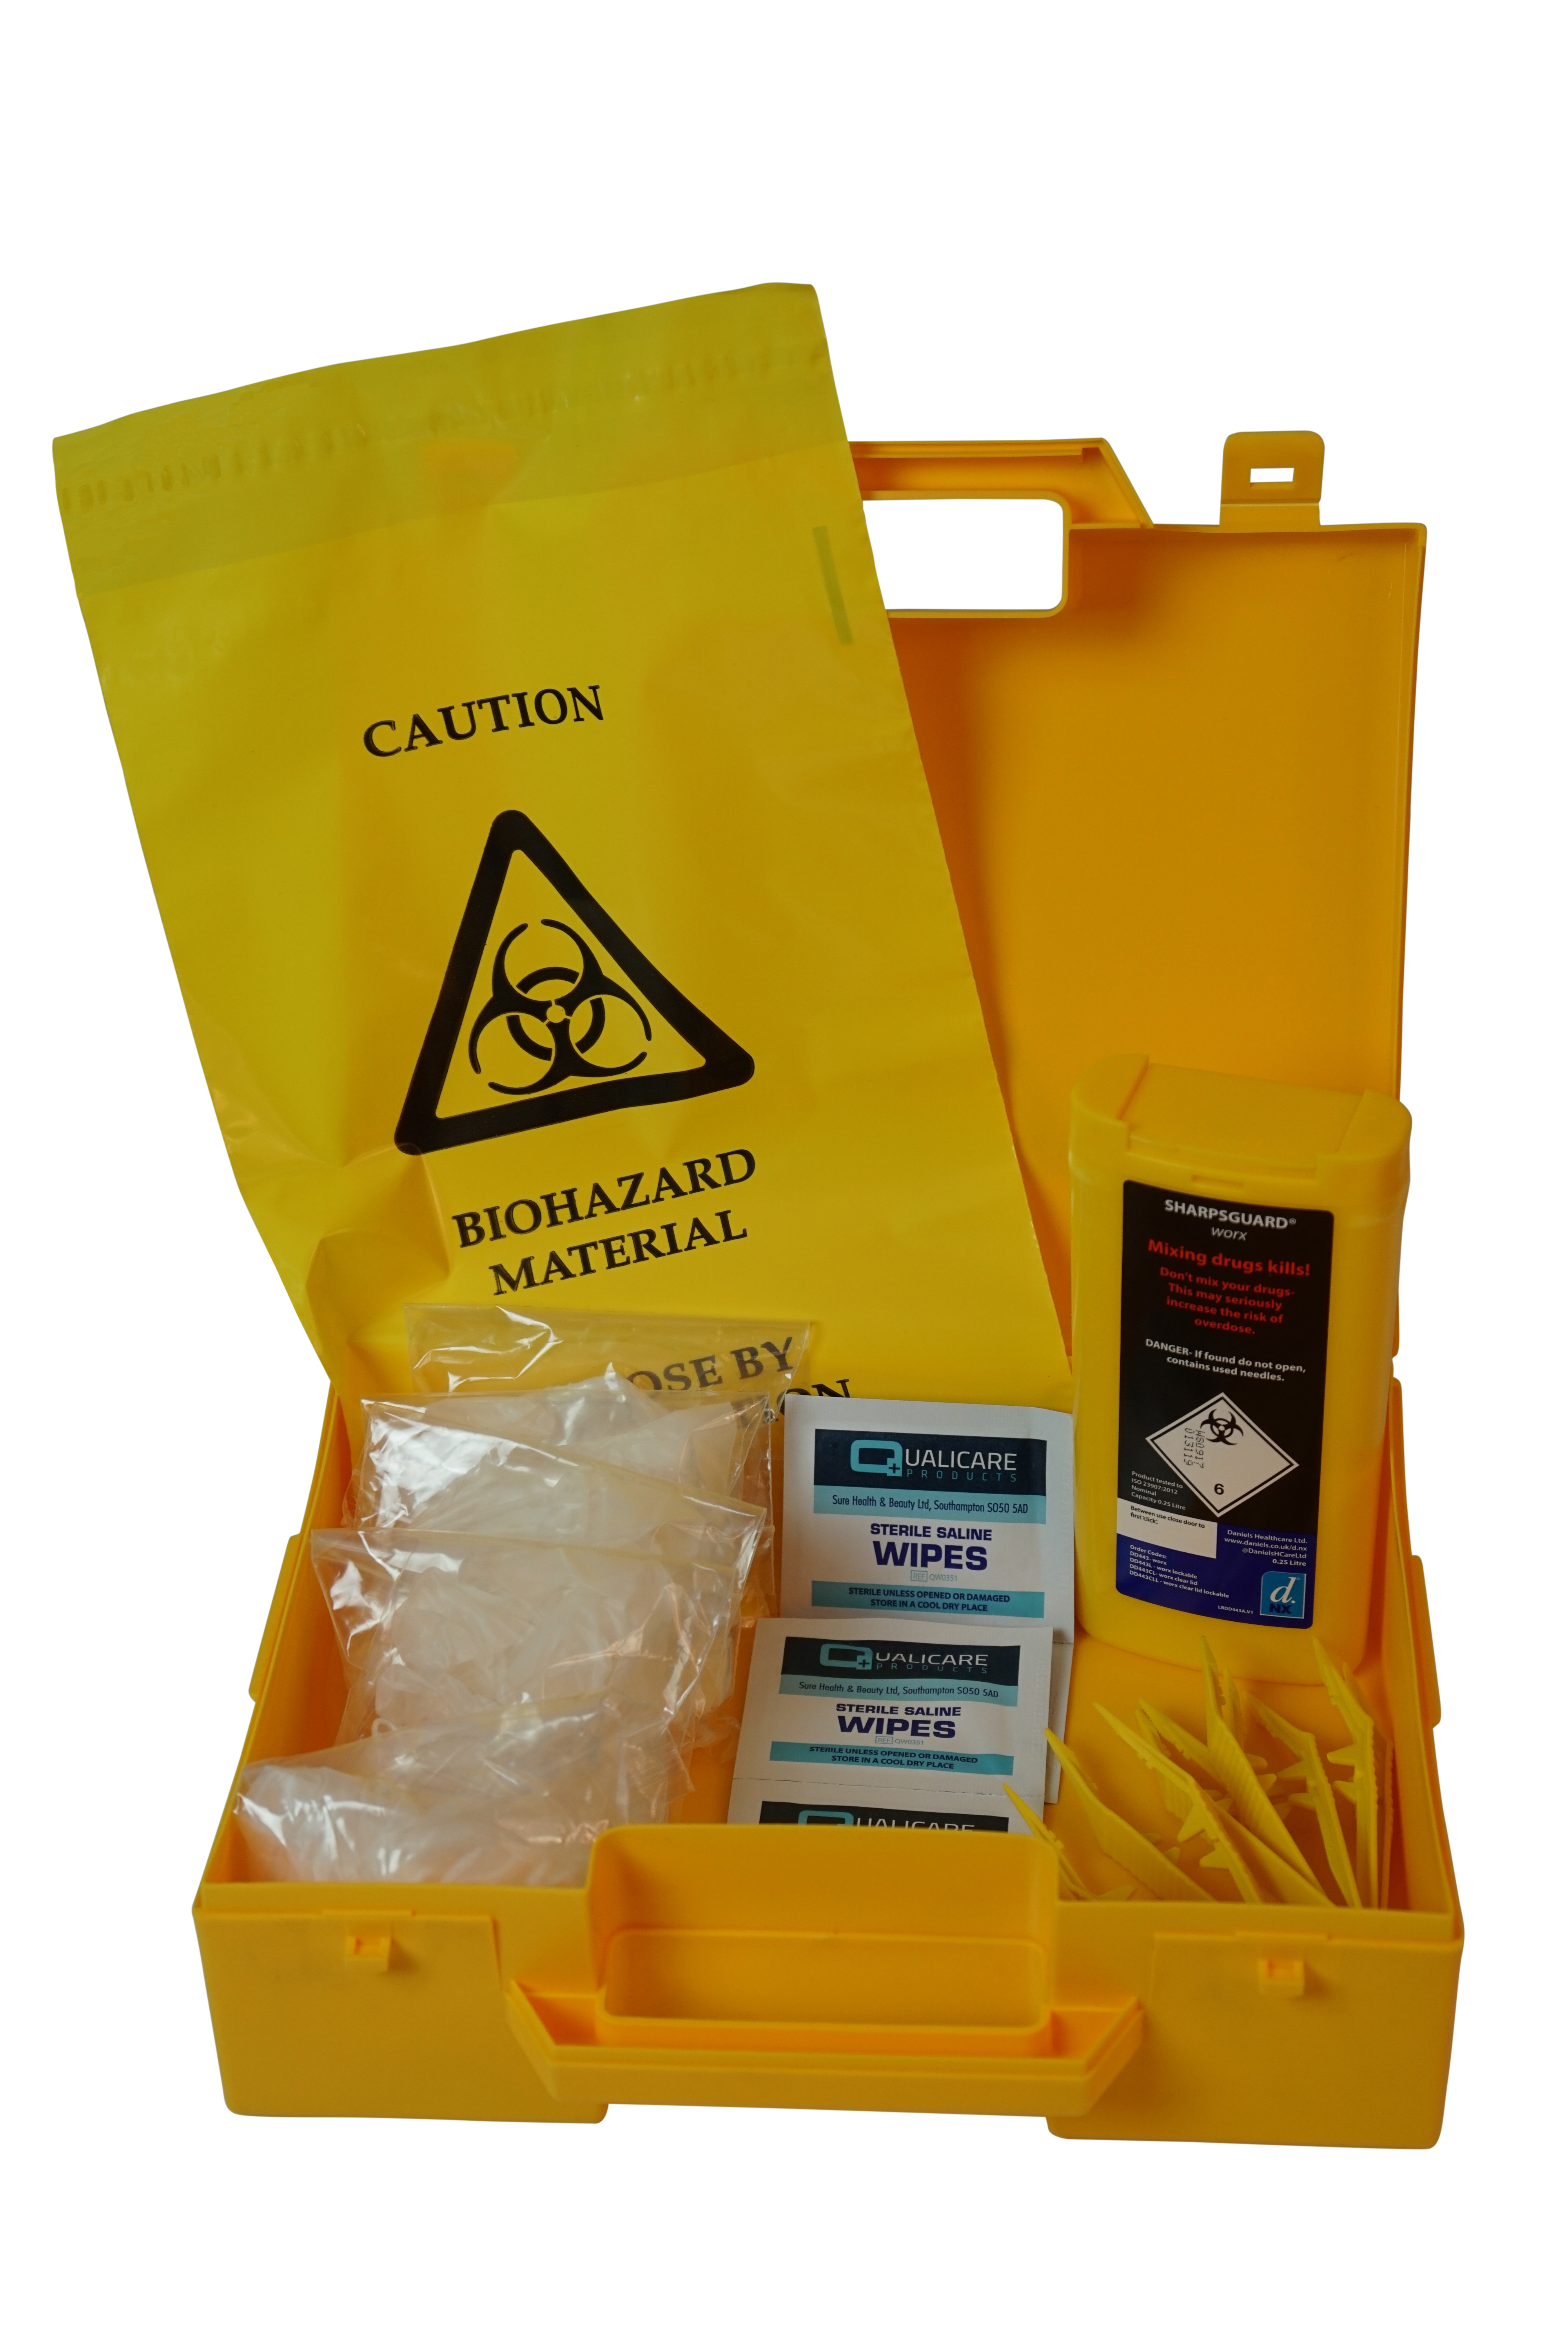 Sharps Disposal Kit comprising of 0.25 litre bin, 5 x wipes, disposal bags, gloves and tweezers supplied in yellow carrying case